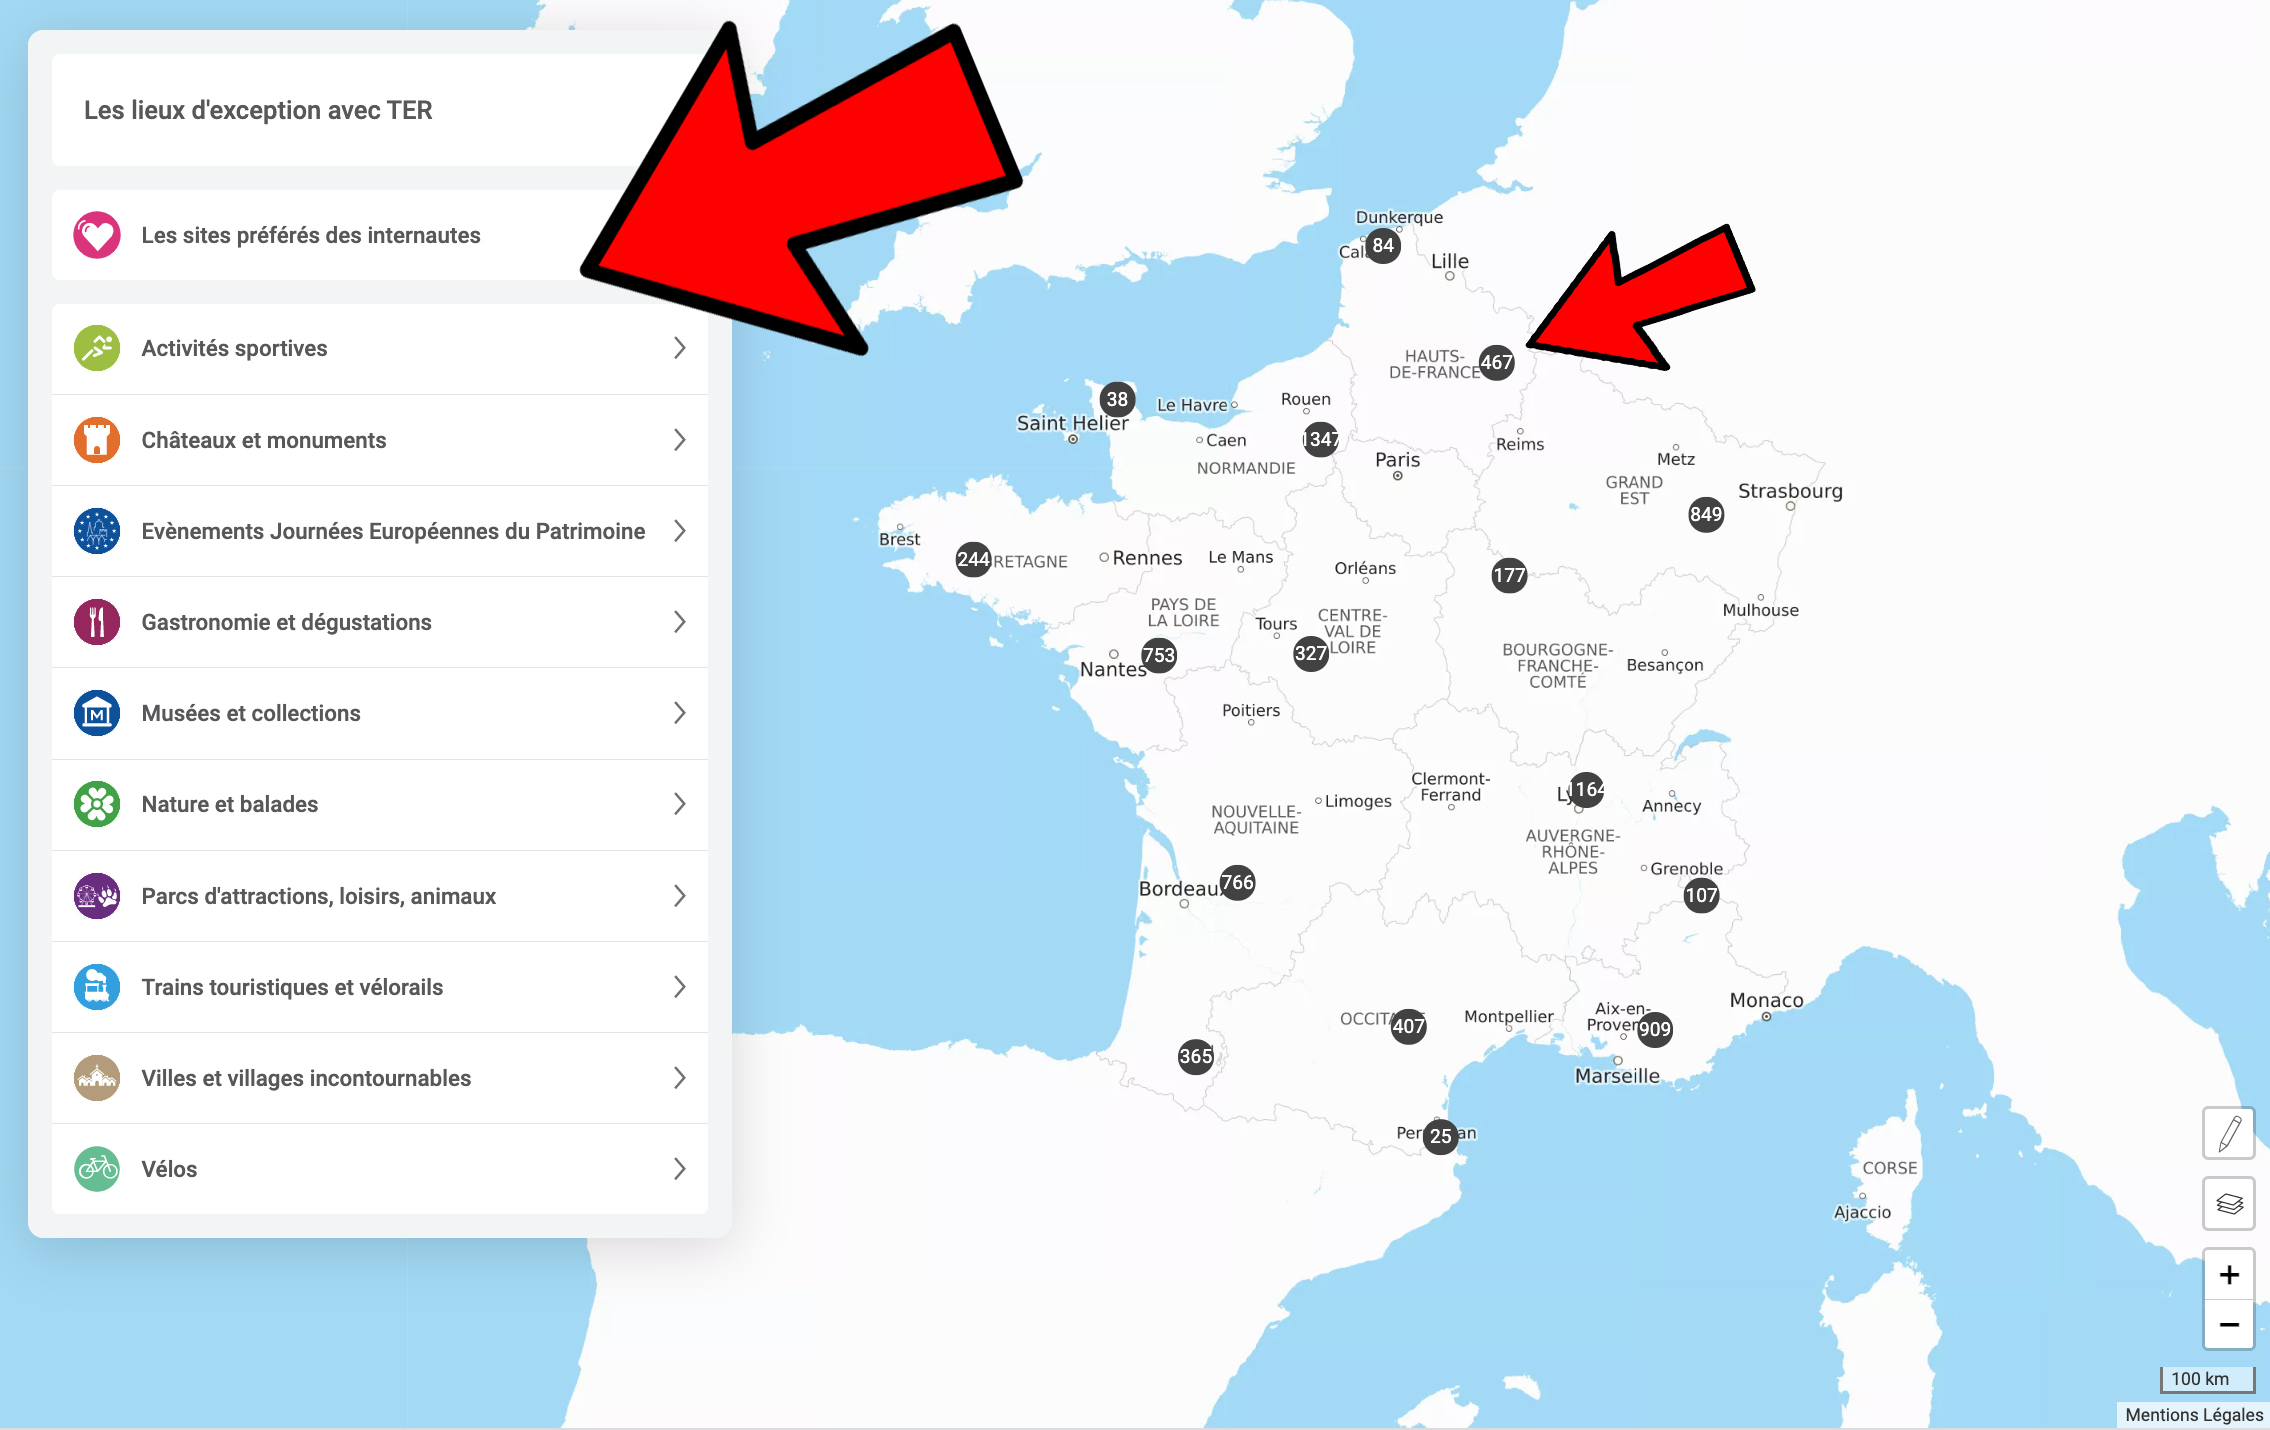 clusters-page-entree-carte-touristique-interactive-ter